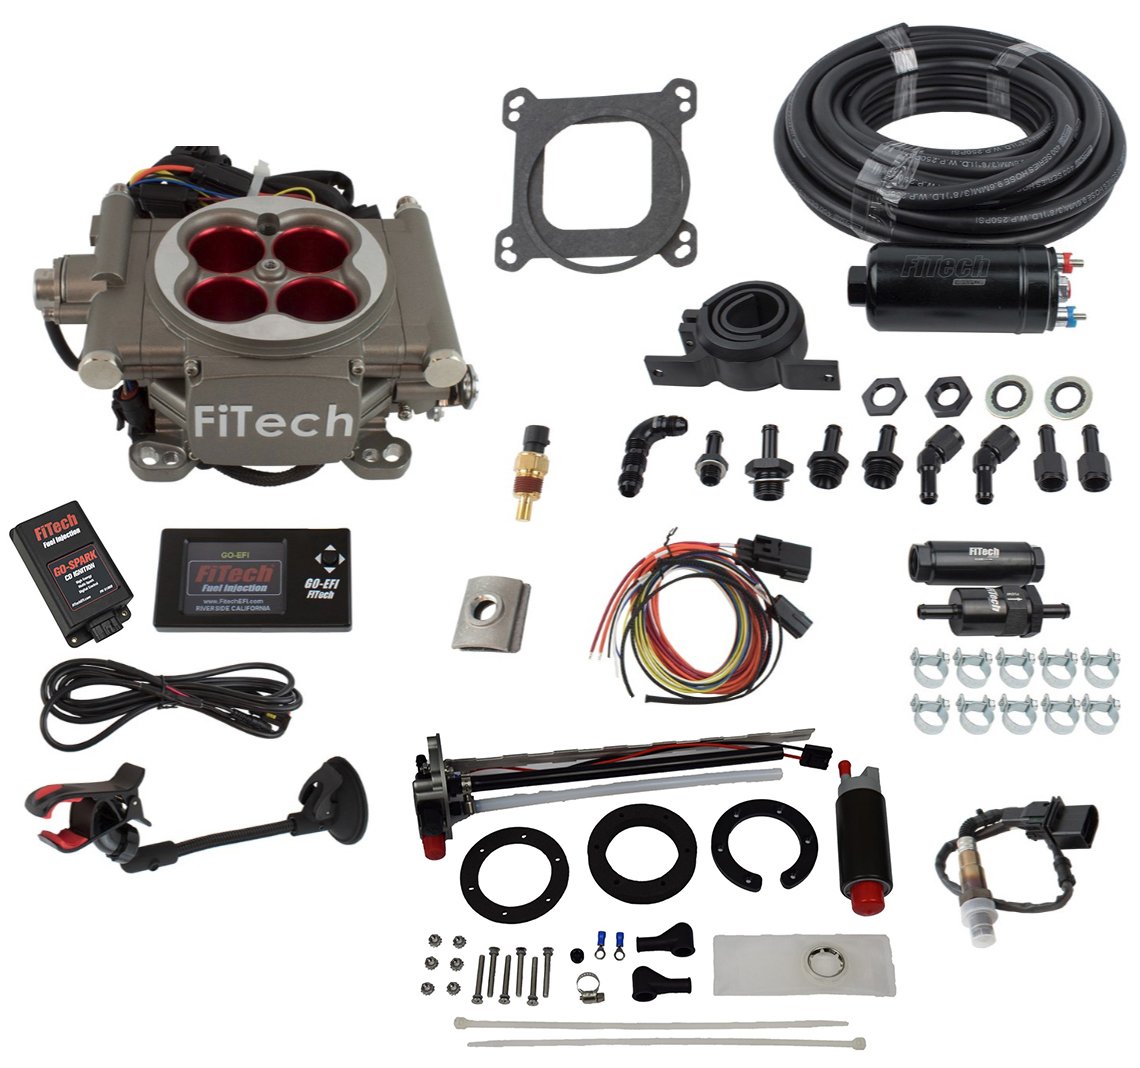 FiTech 93603: GoStreet EFI Electronic Fuel Injection Master Kit, With 400  HP Throttle Body, Go-Fuel Universal In-Tank Pump Module 340 LPH & CDI Box